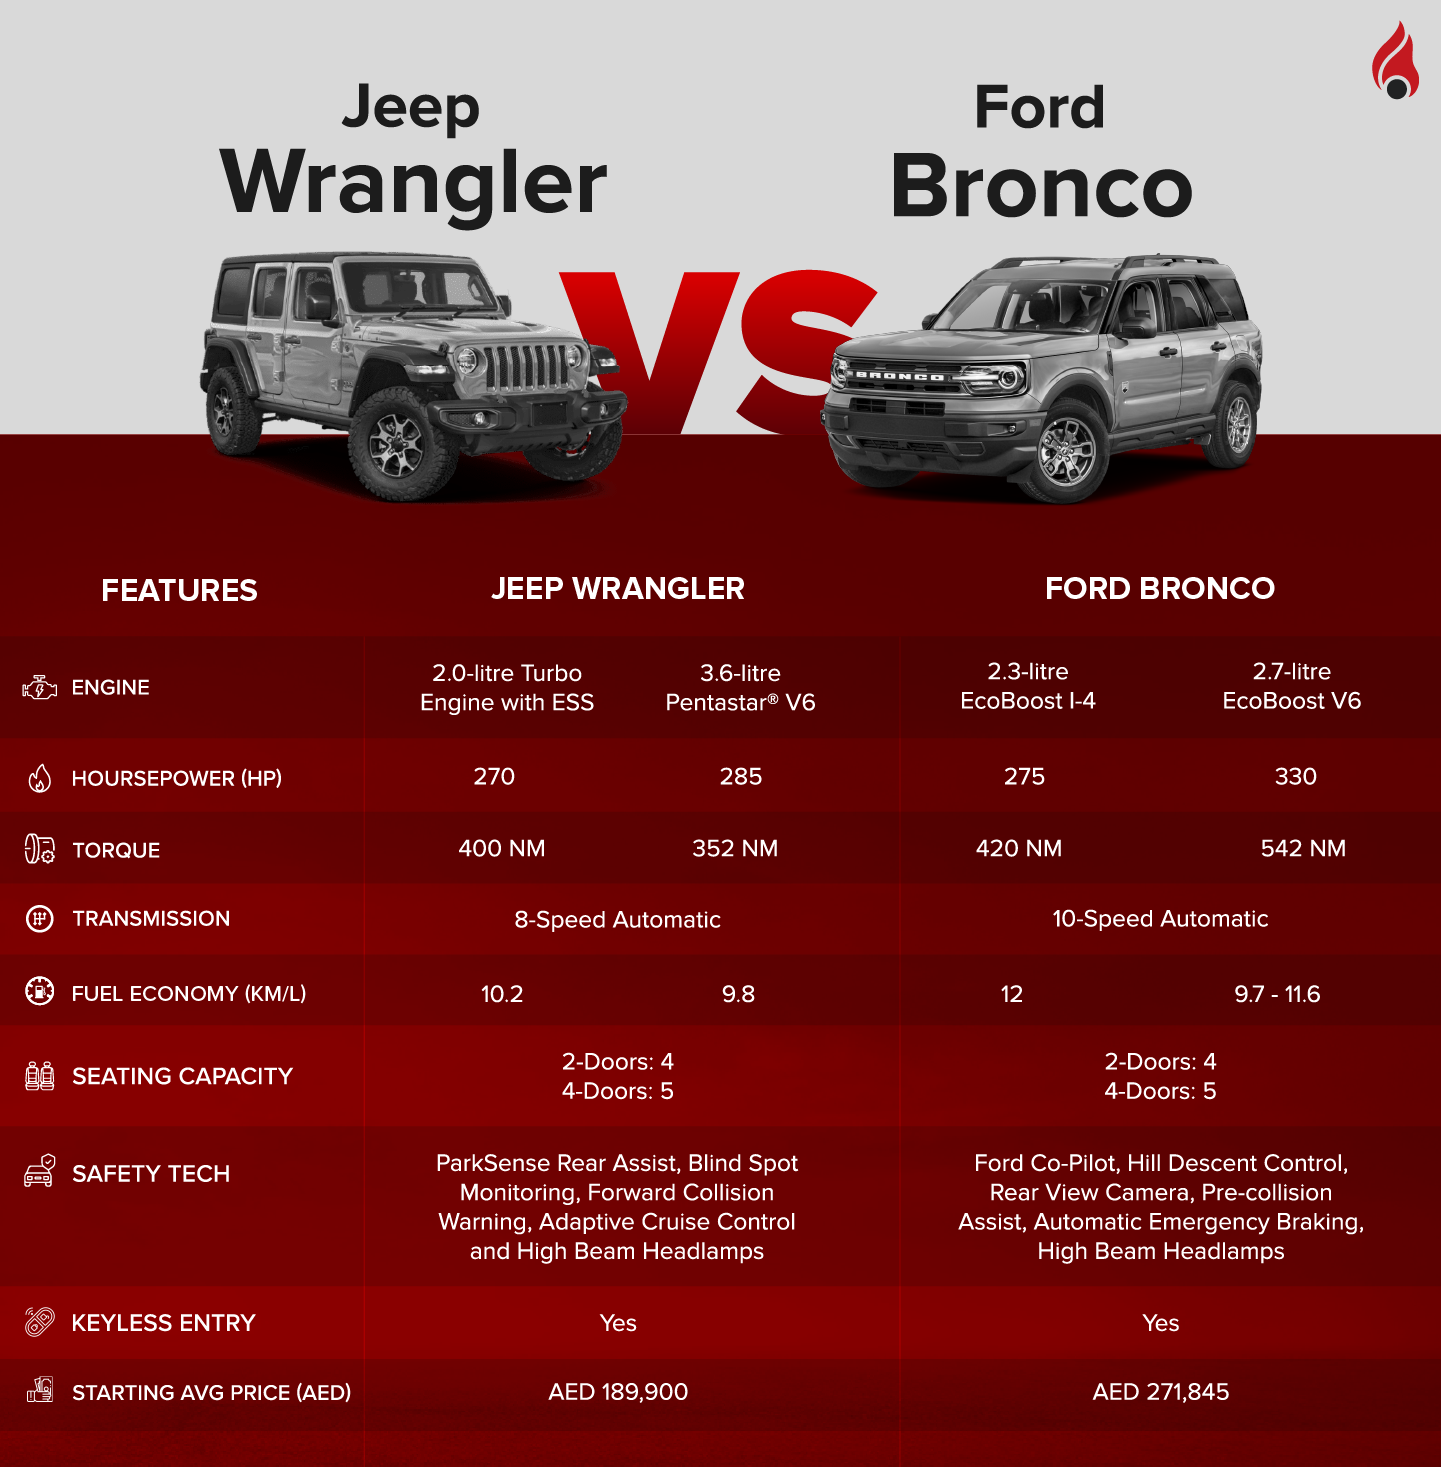 feature comparison of Jeep Wrangler and Ford Bronco